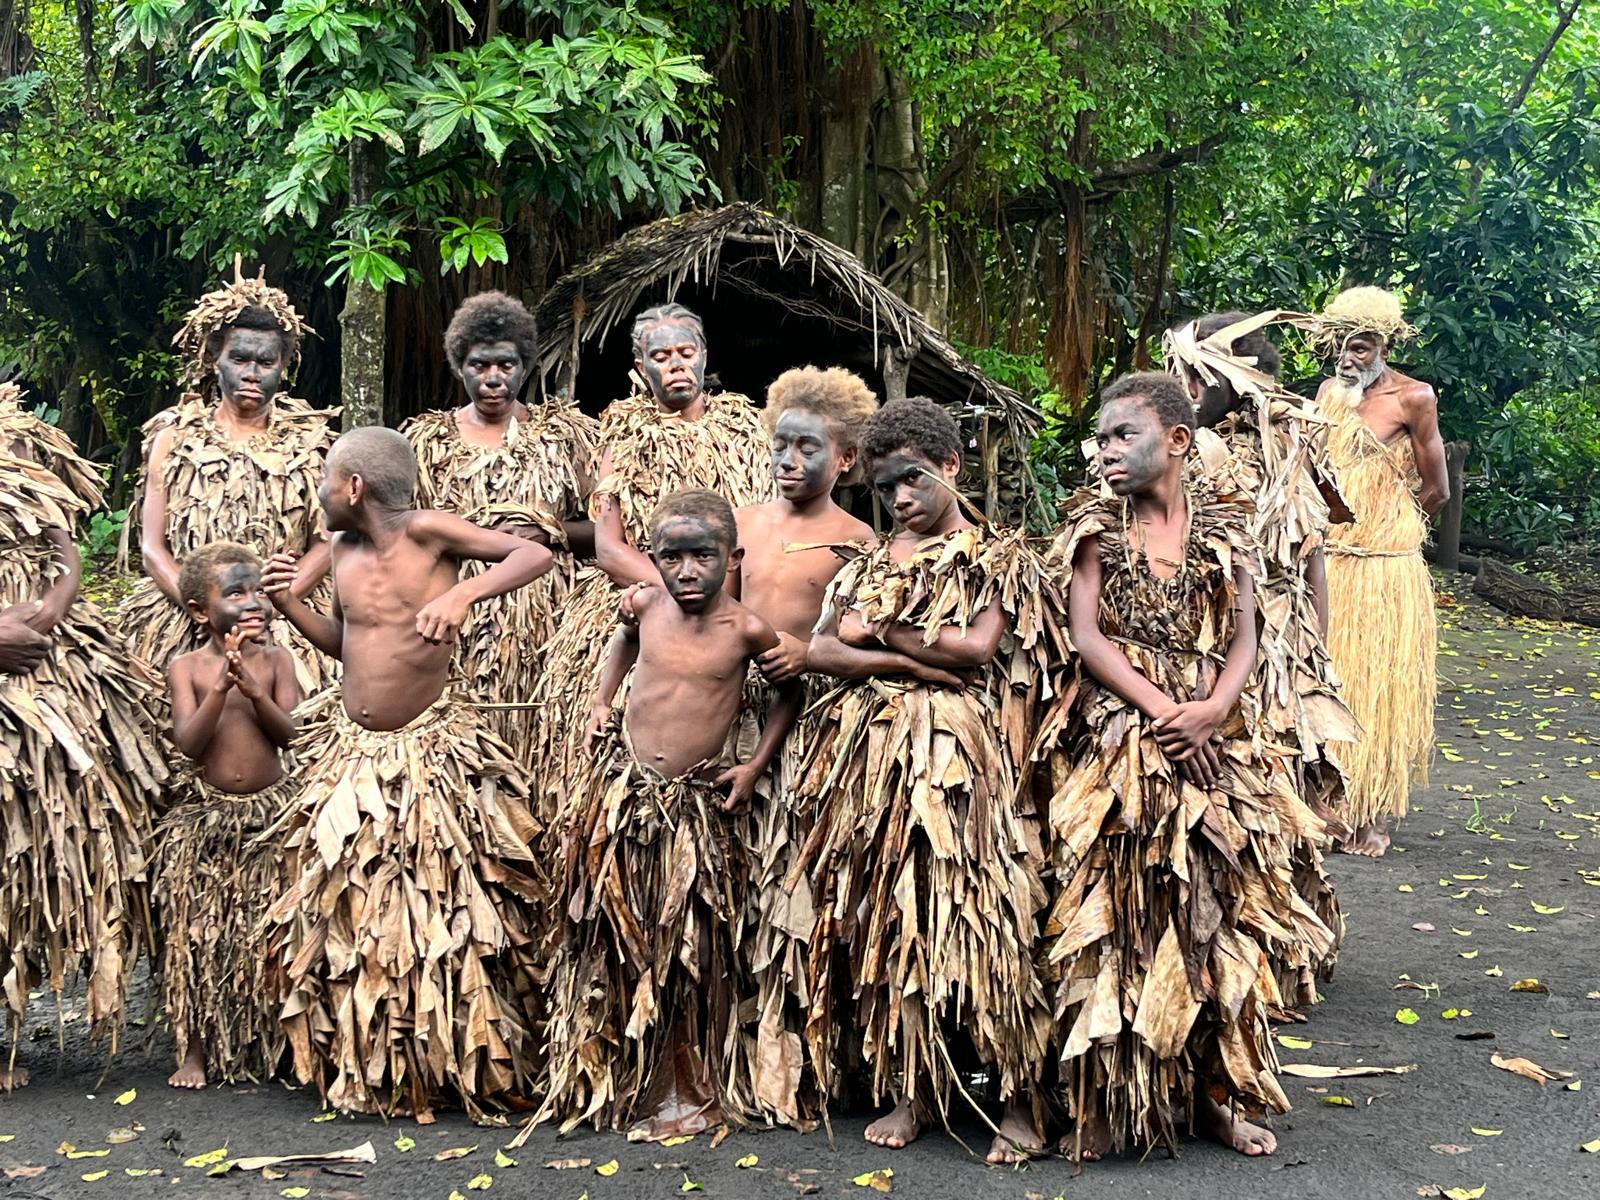 Top 7 fascinating facts about Vanuatu and bush tribes you probably didn’t know.